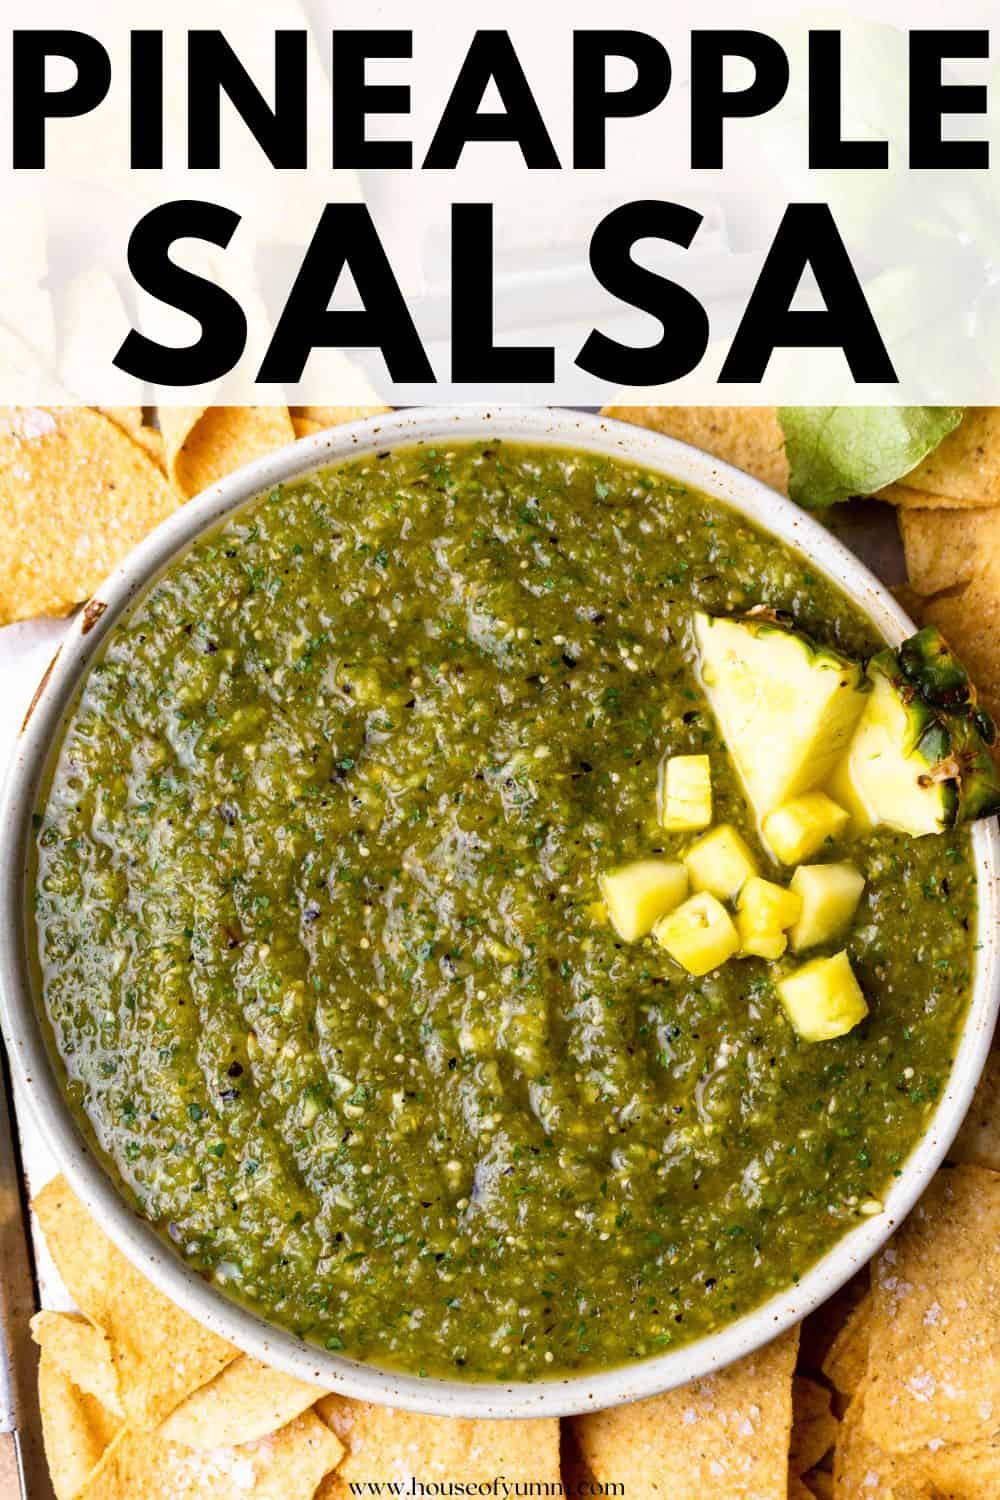 Pineapple salsa with text.